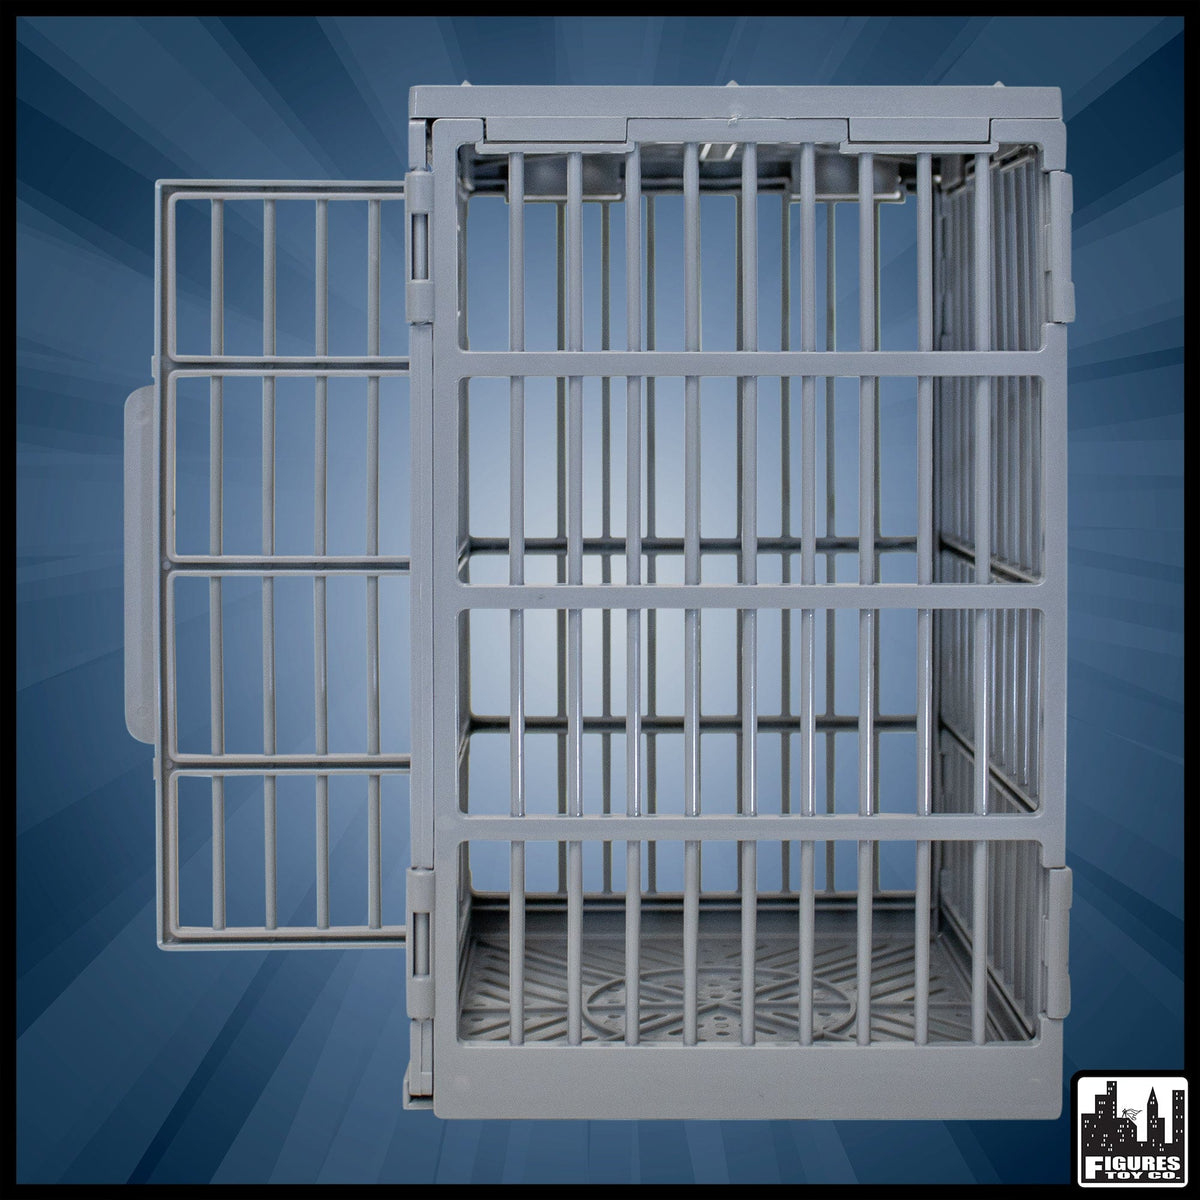 Miniature Toy Jail Prison Cell for 6-8 Inch Action Figures